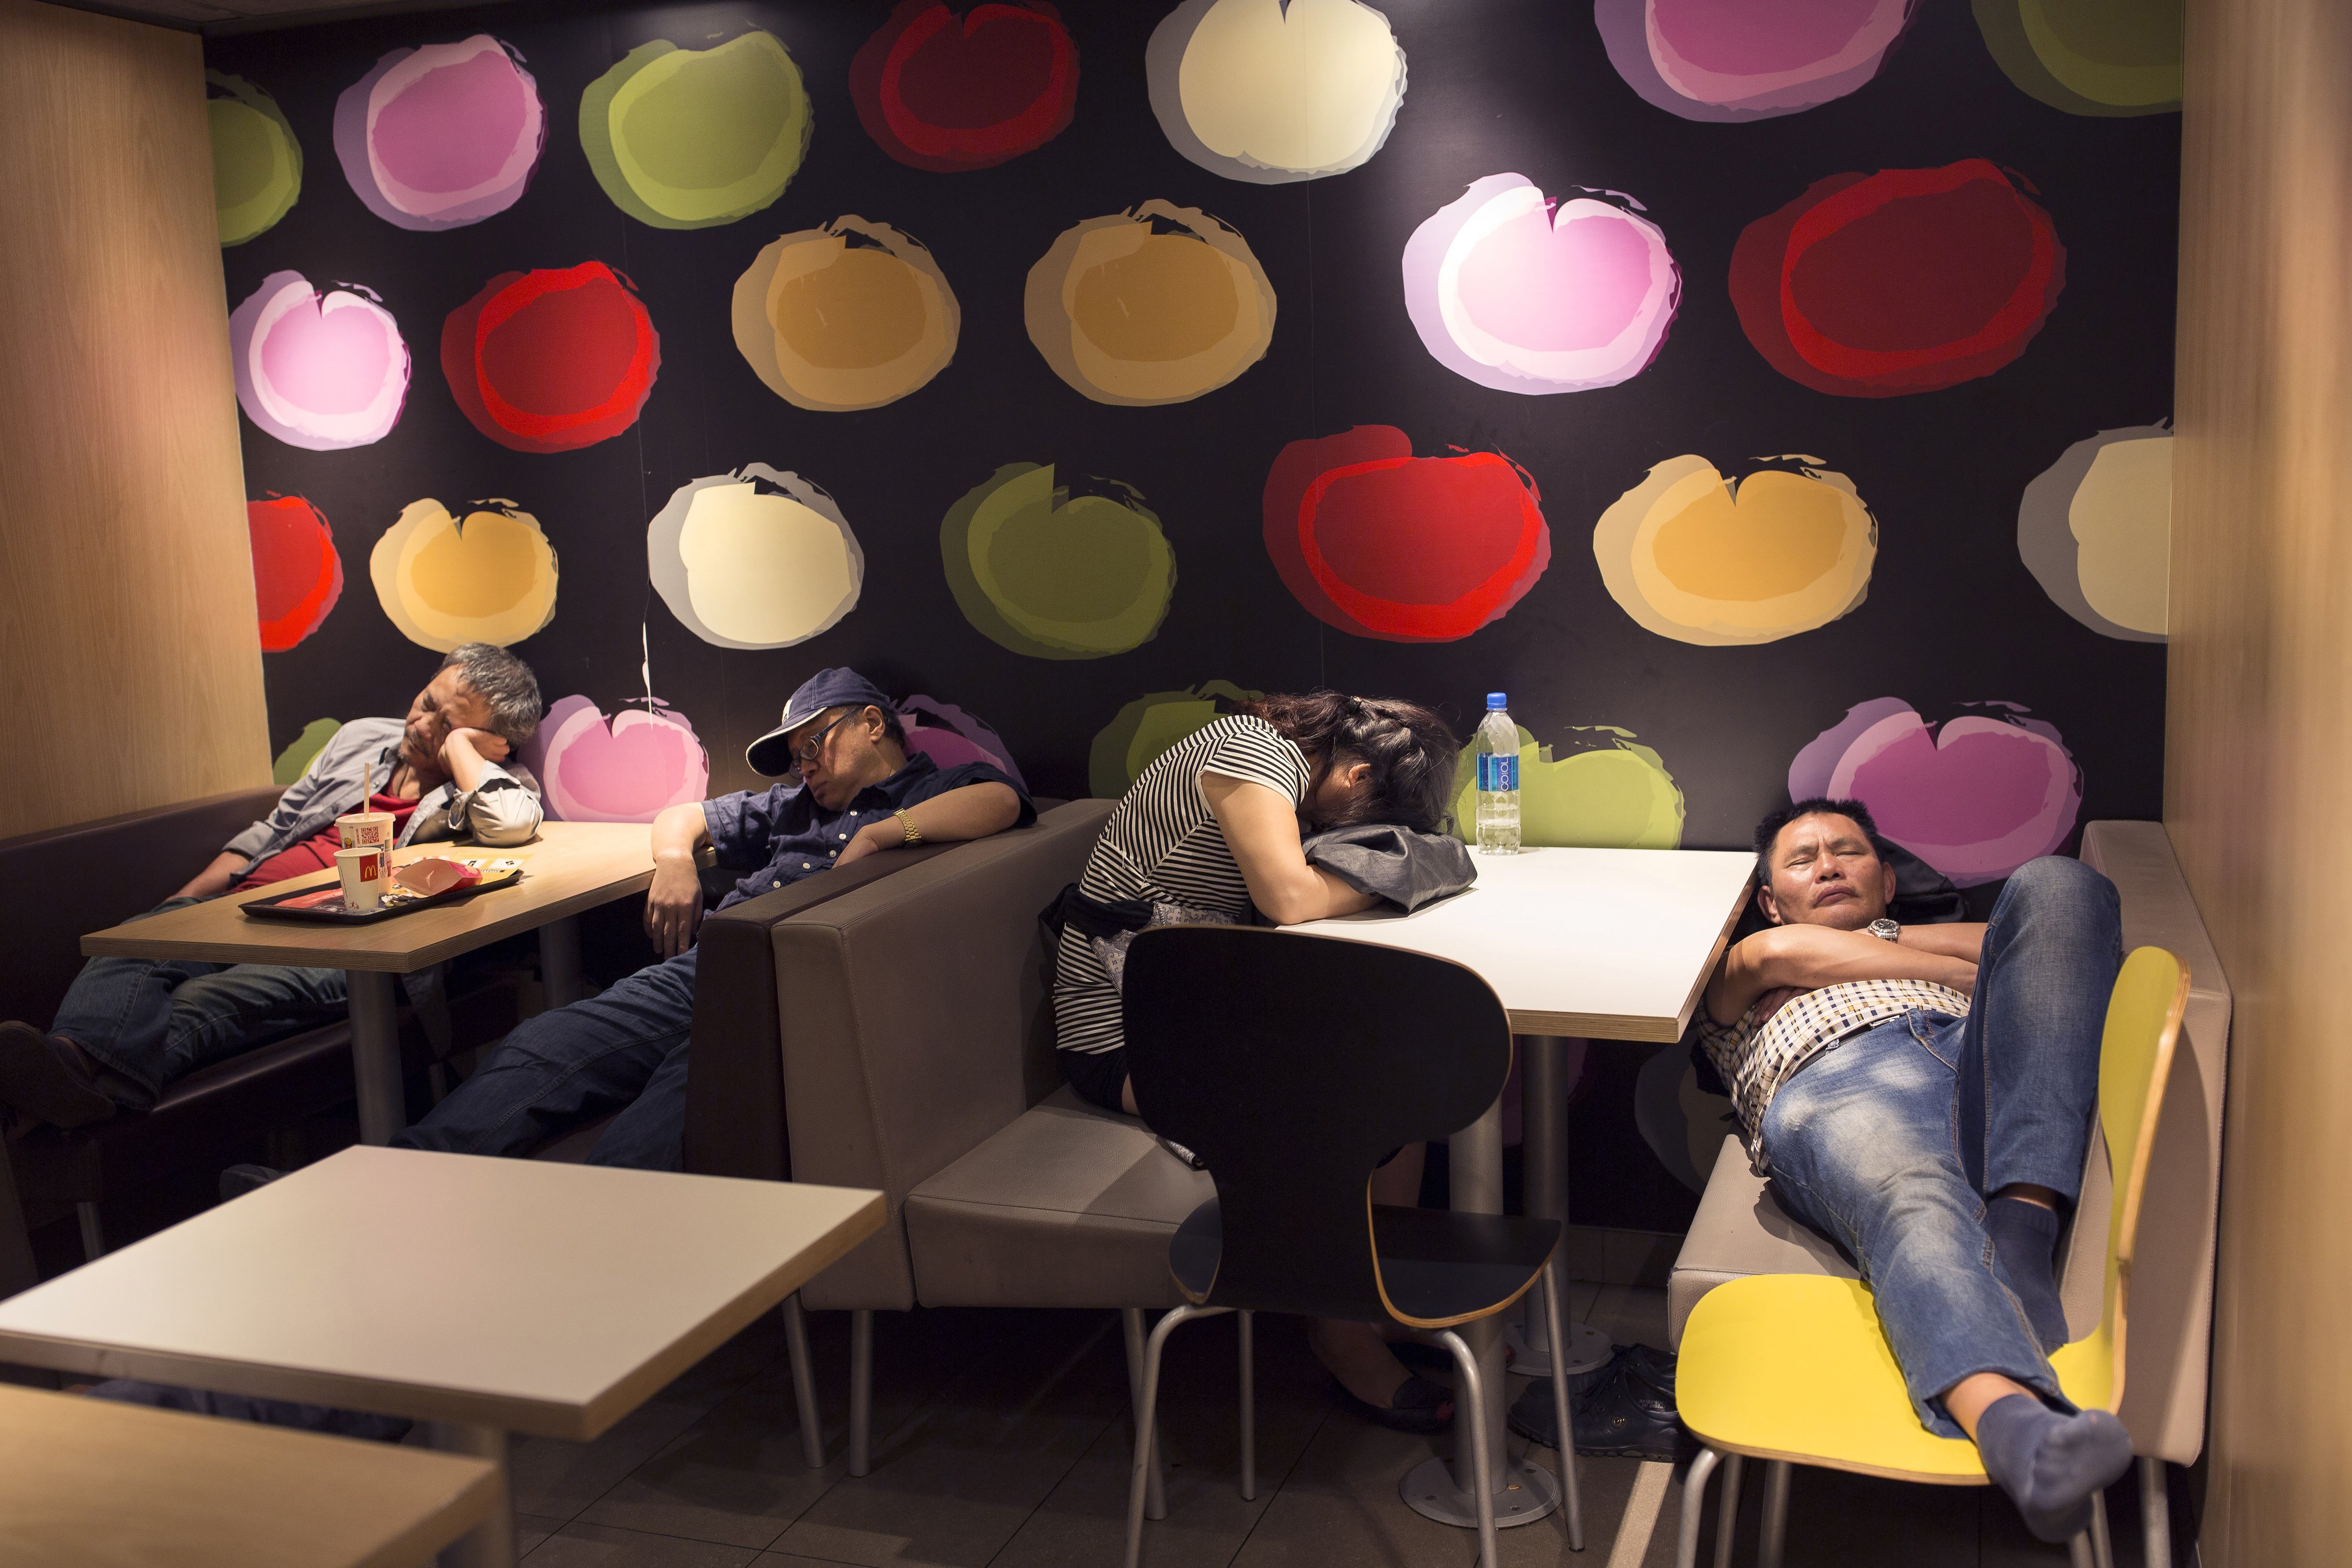 Dubbed "McRefugees", people sleep at night in 24-hour McDonald’s branches around Hong Kong due to homelessness. Photo: AP